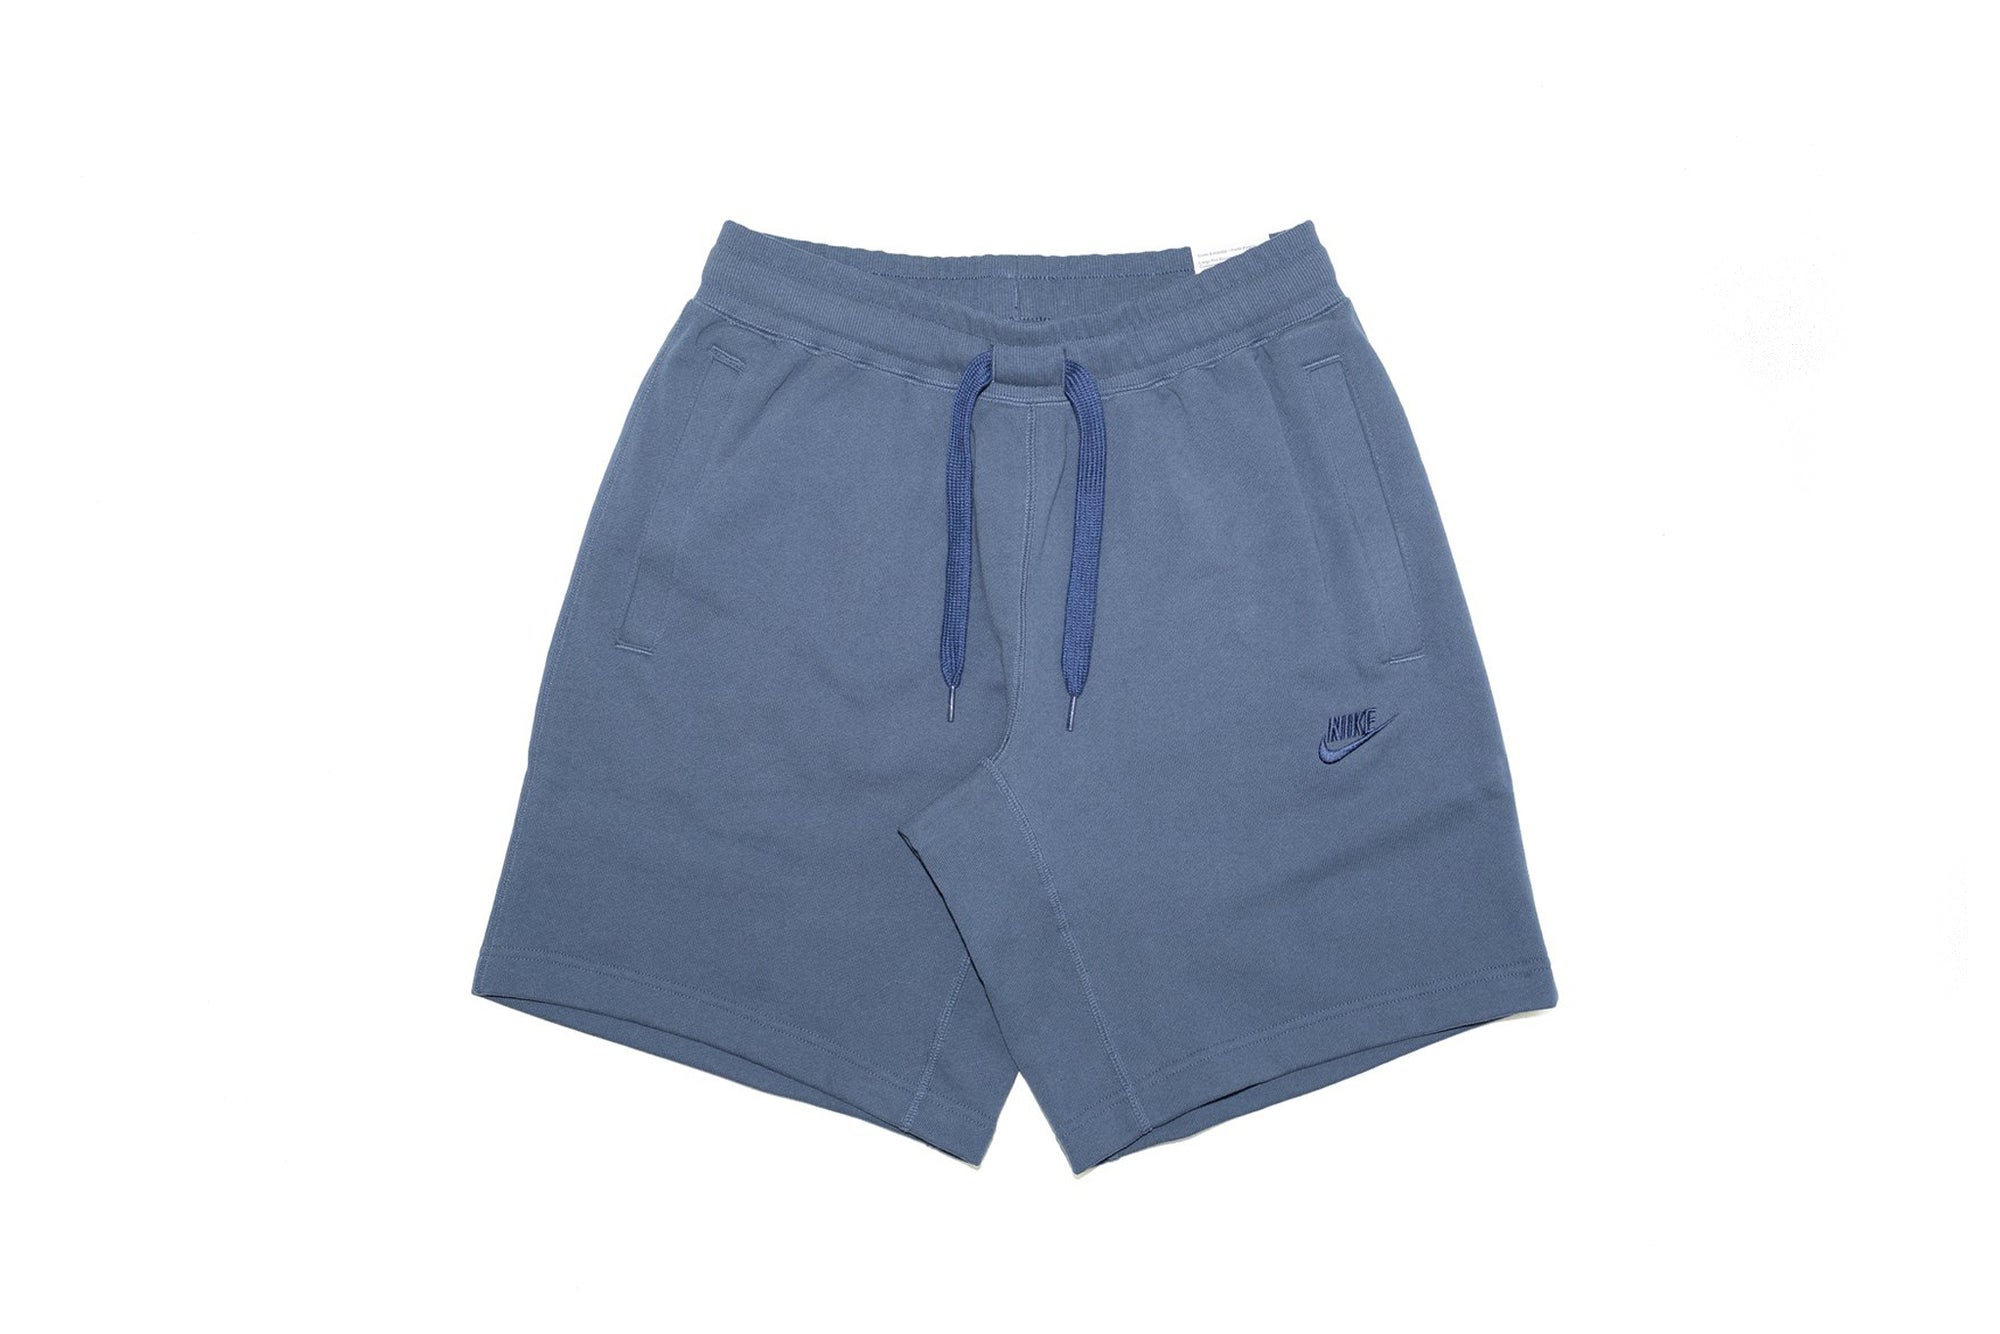 Nike Standard Fit Above Knee Shorts - SoleFly